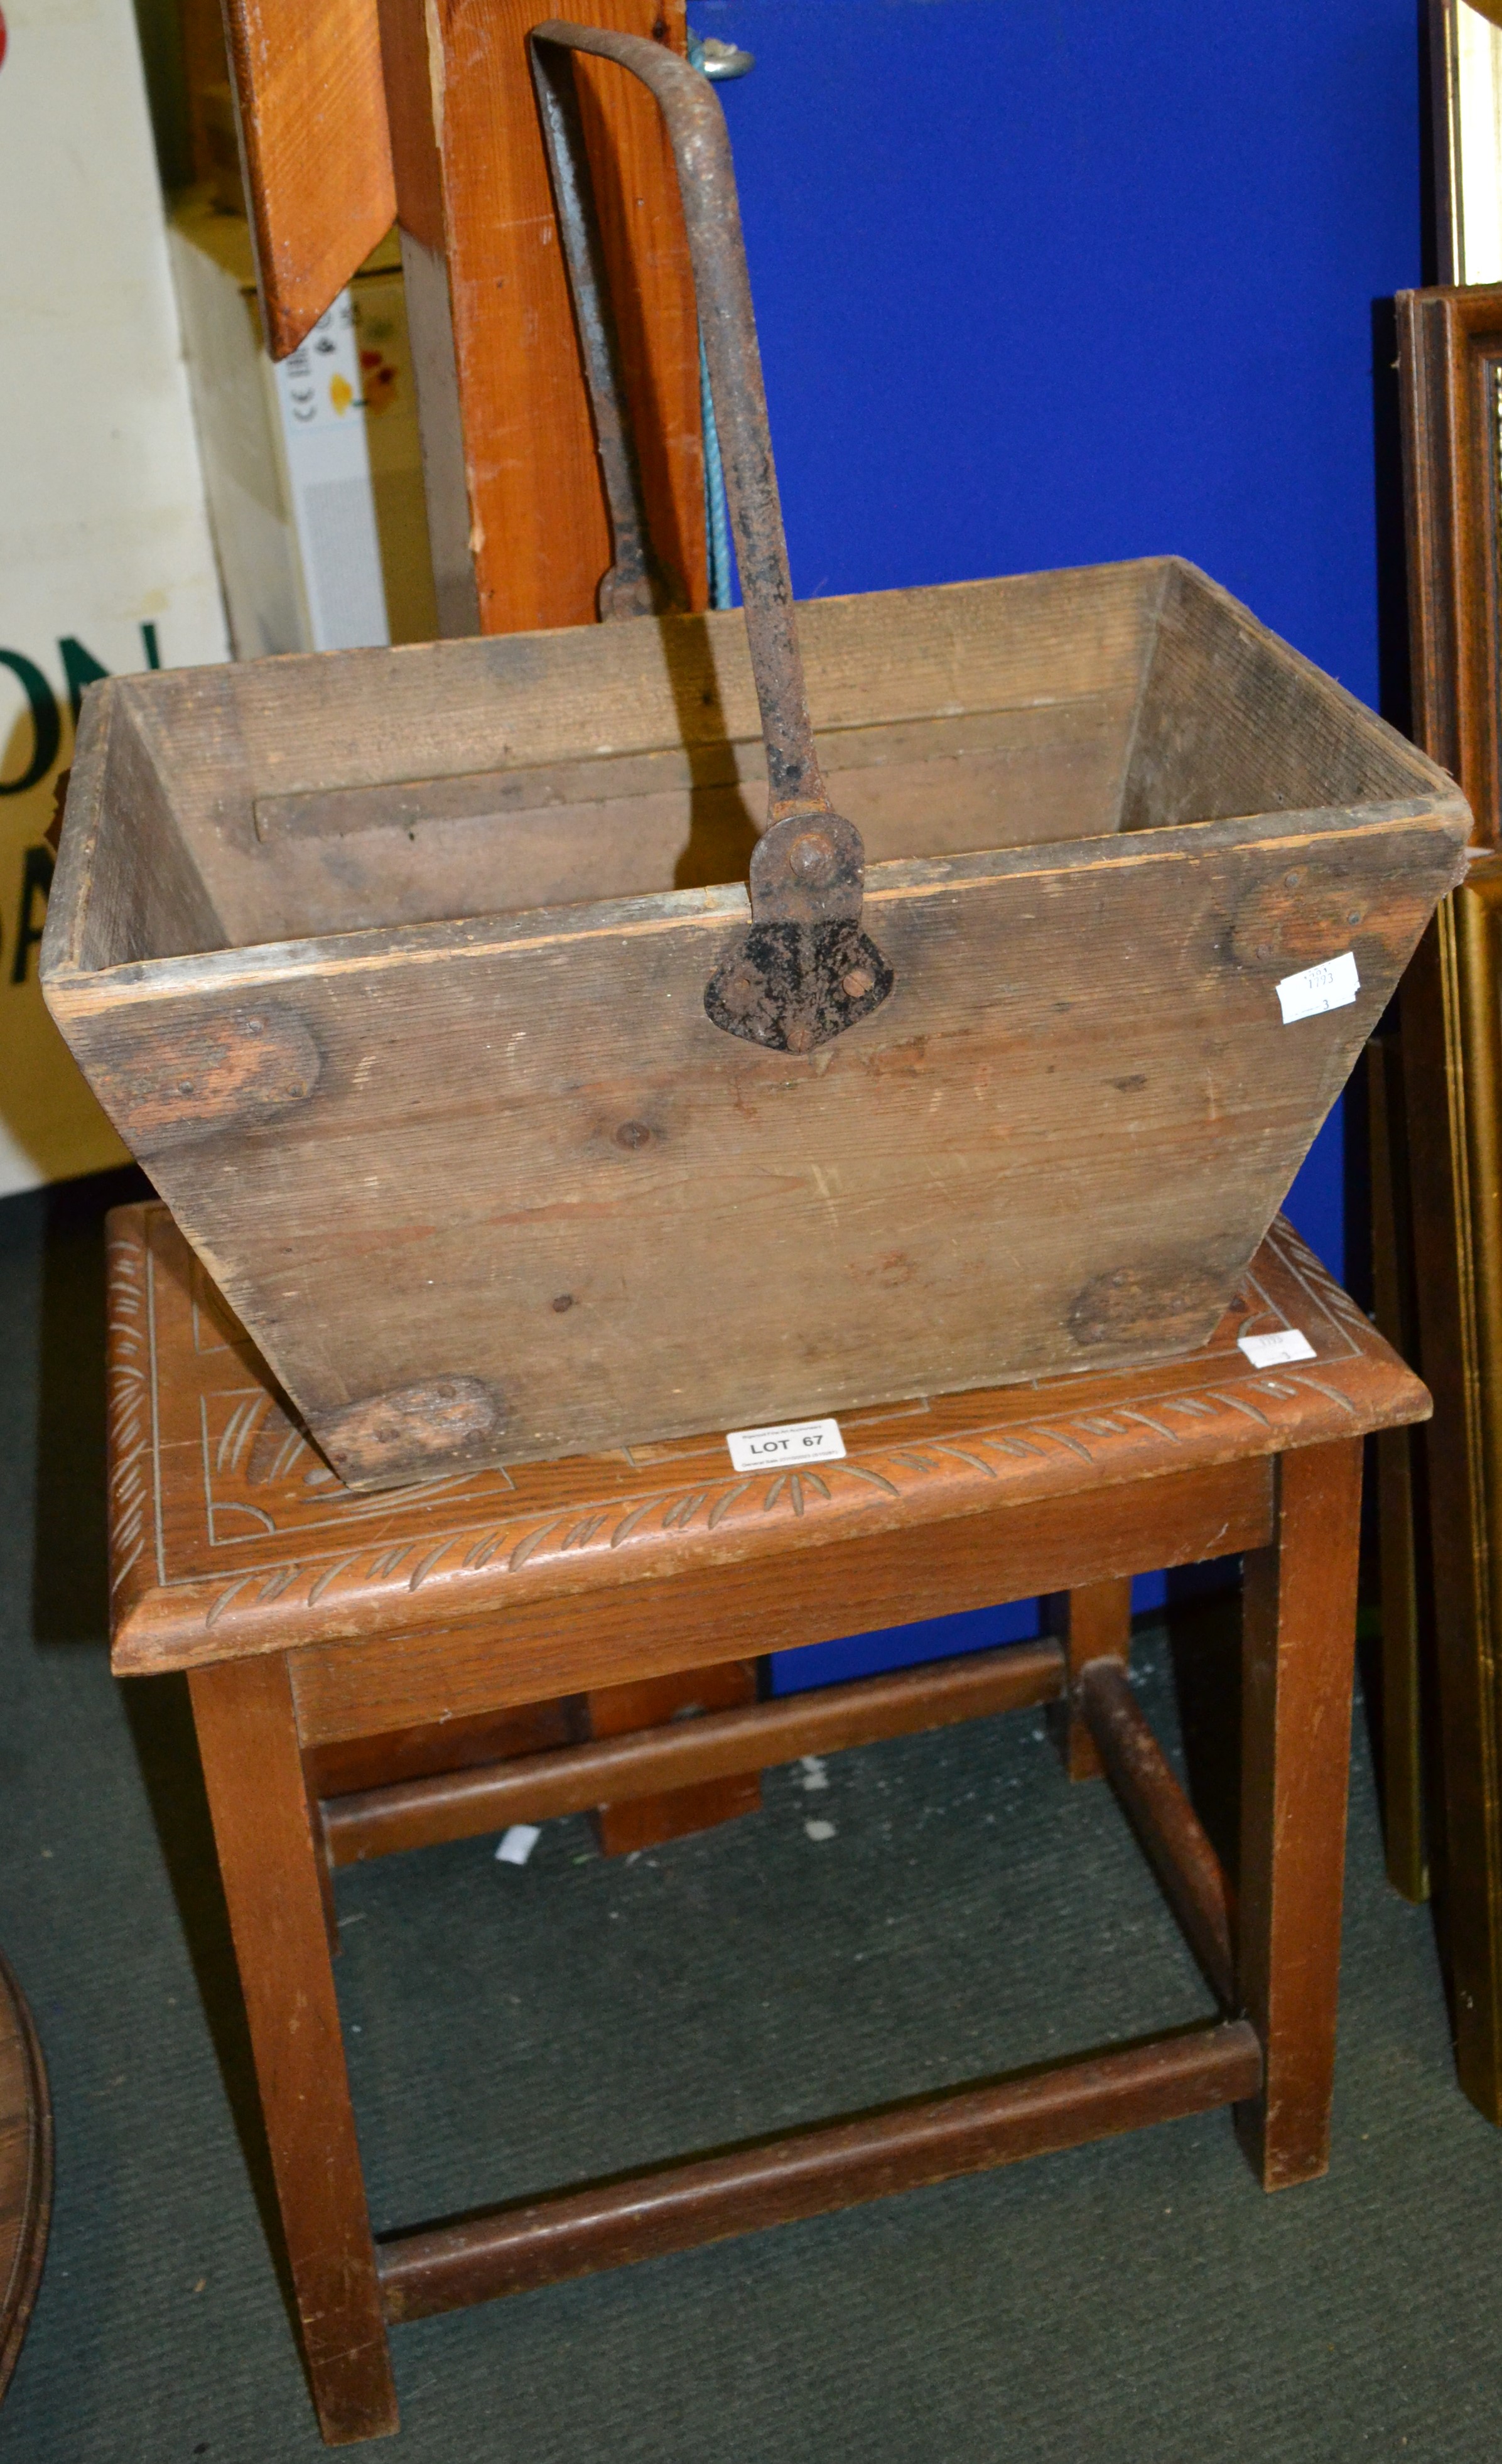 Wooden stool and a wooden 'bucket'